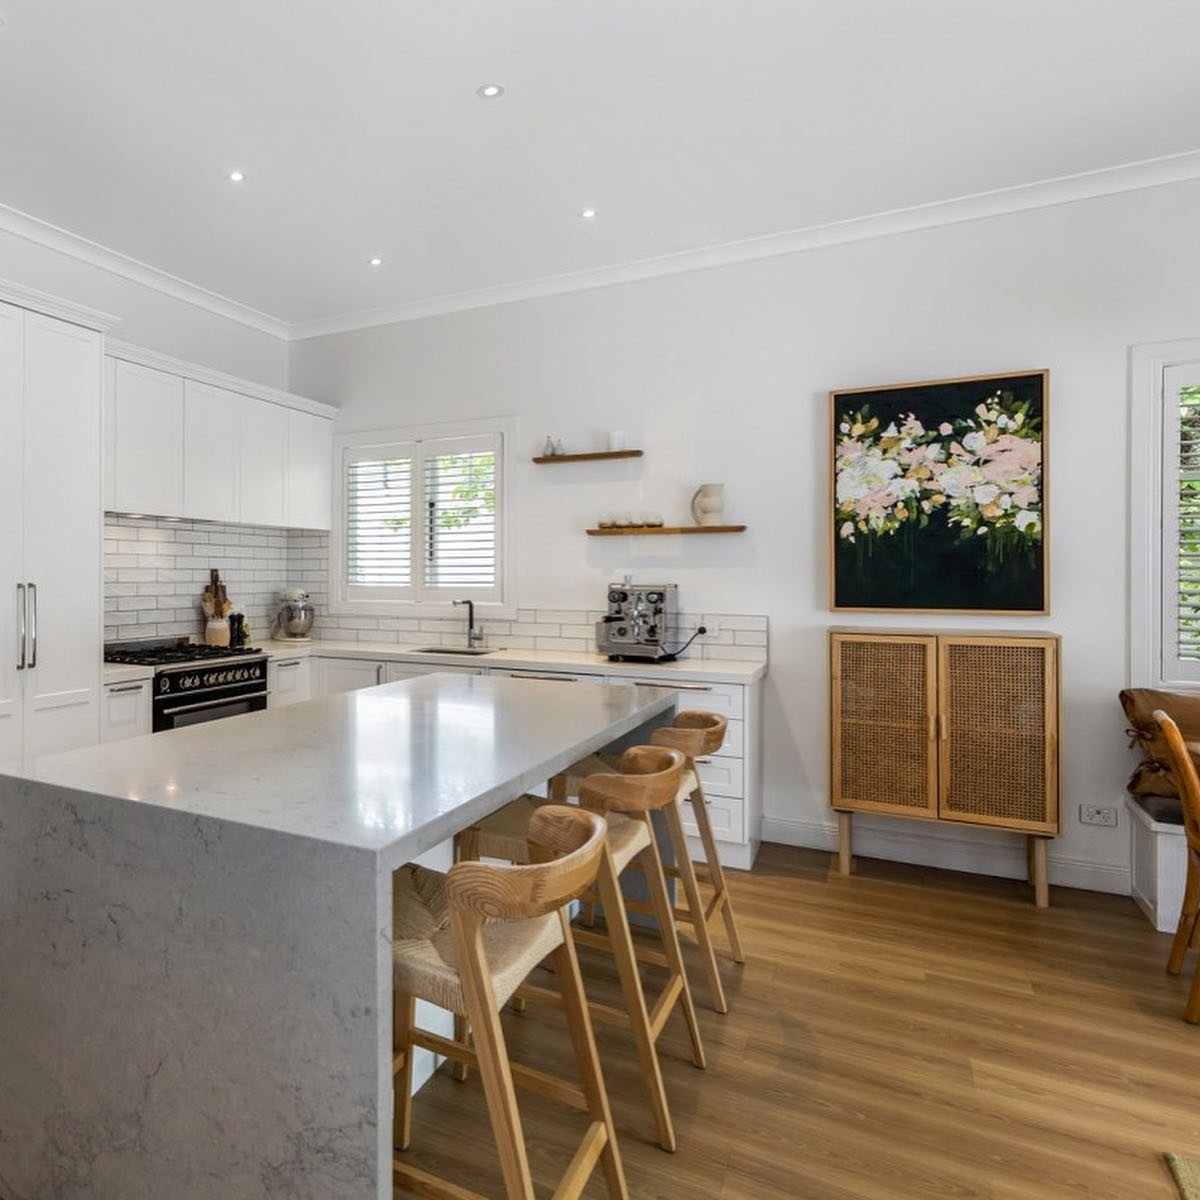 It&rsquo;s always a treat to stage homes such as these, imbued with love and care.  And as a added bonus these owners had some wonderful art to work with. 
.
.
#finer #finerhomes #partialstaging #homestaging #aucklandhomestaging #bungalow #homestylin